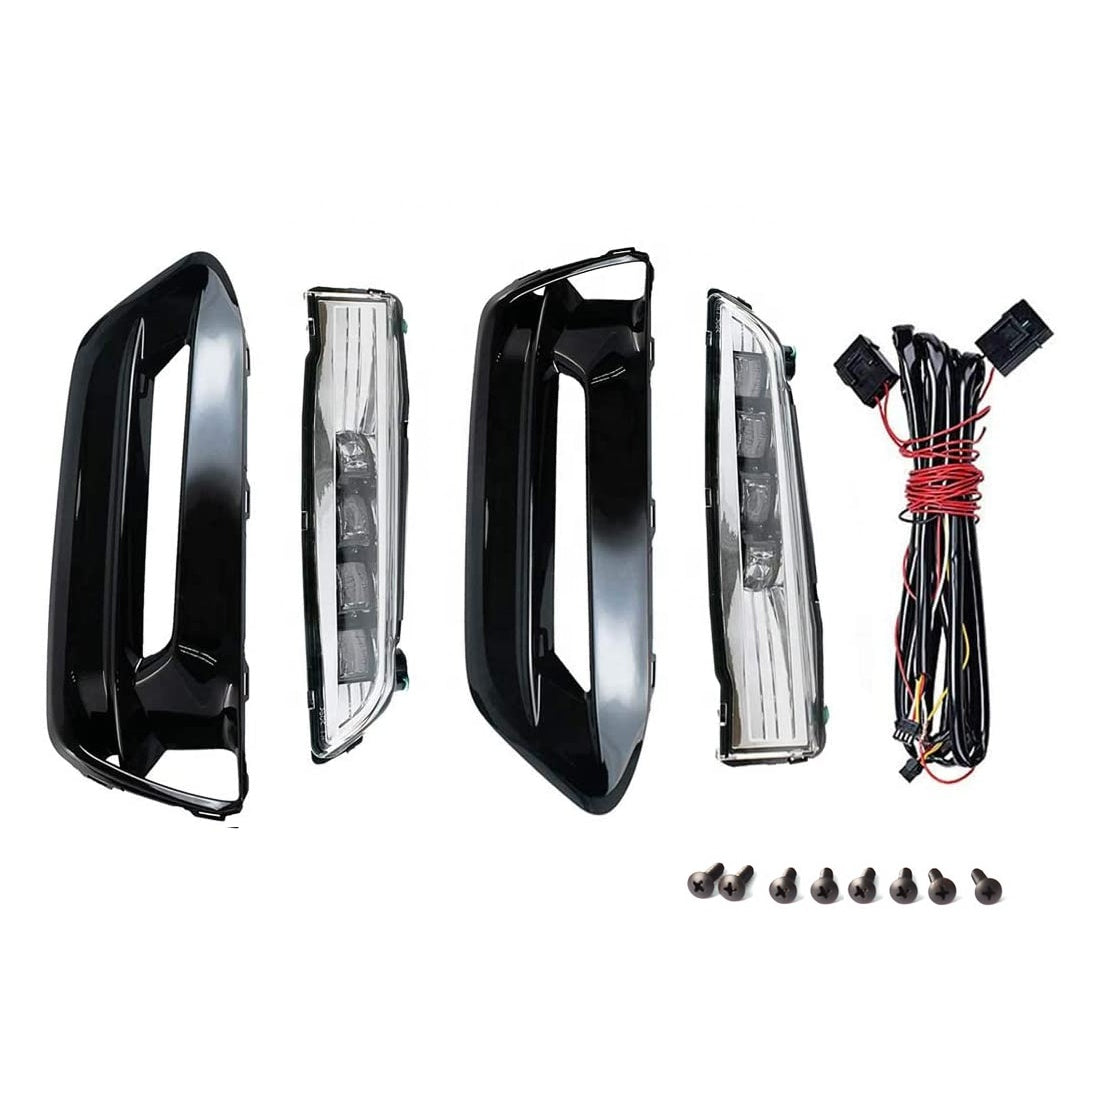 Sequential LED Fog Lights for Cars